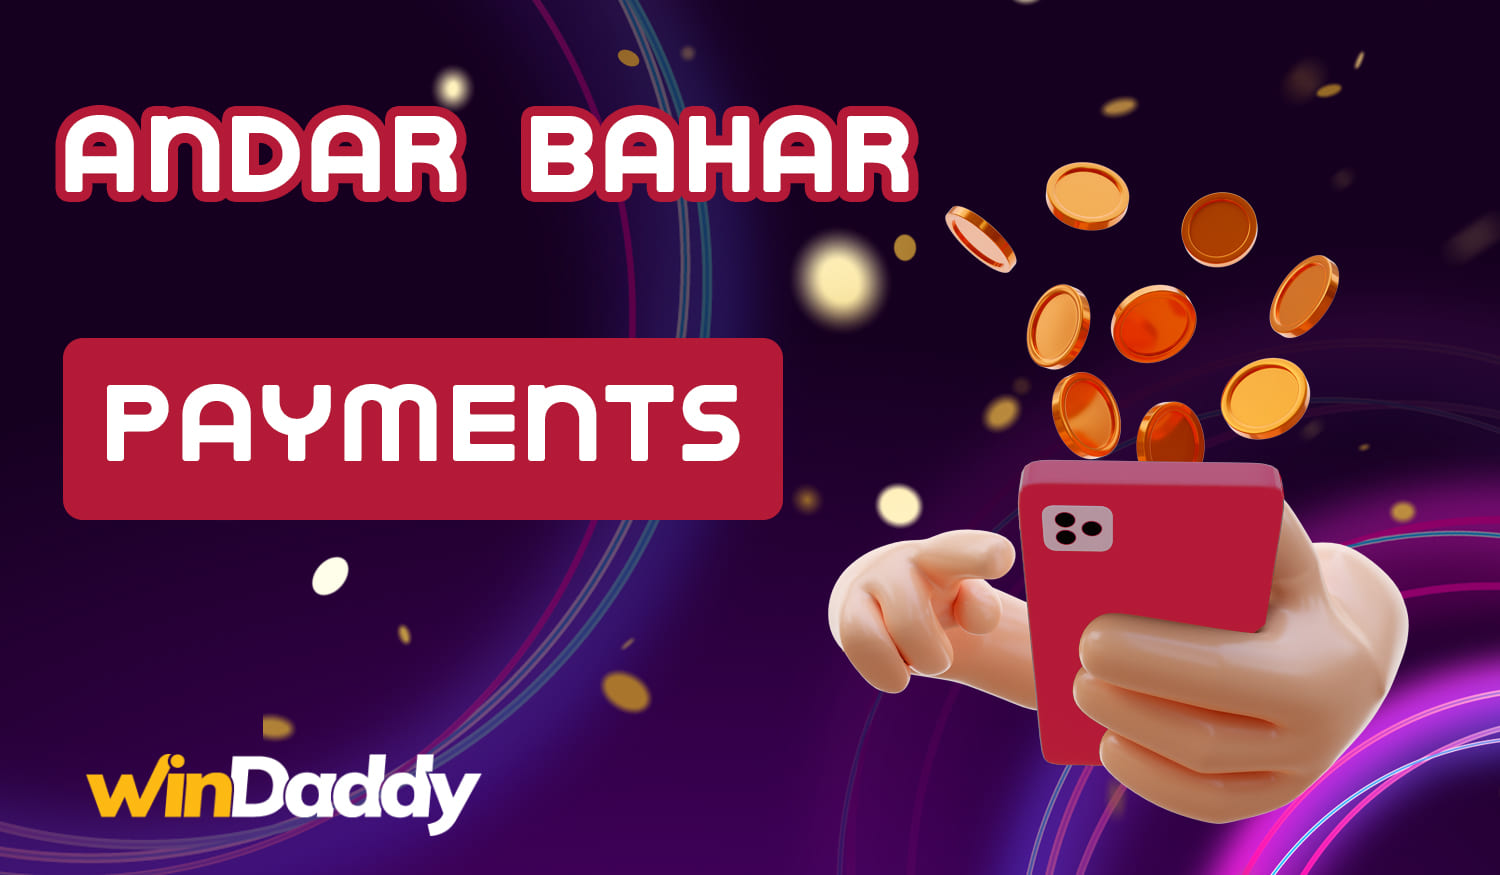 Which payment methods Indian Windaddy users can use on the site